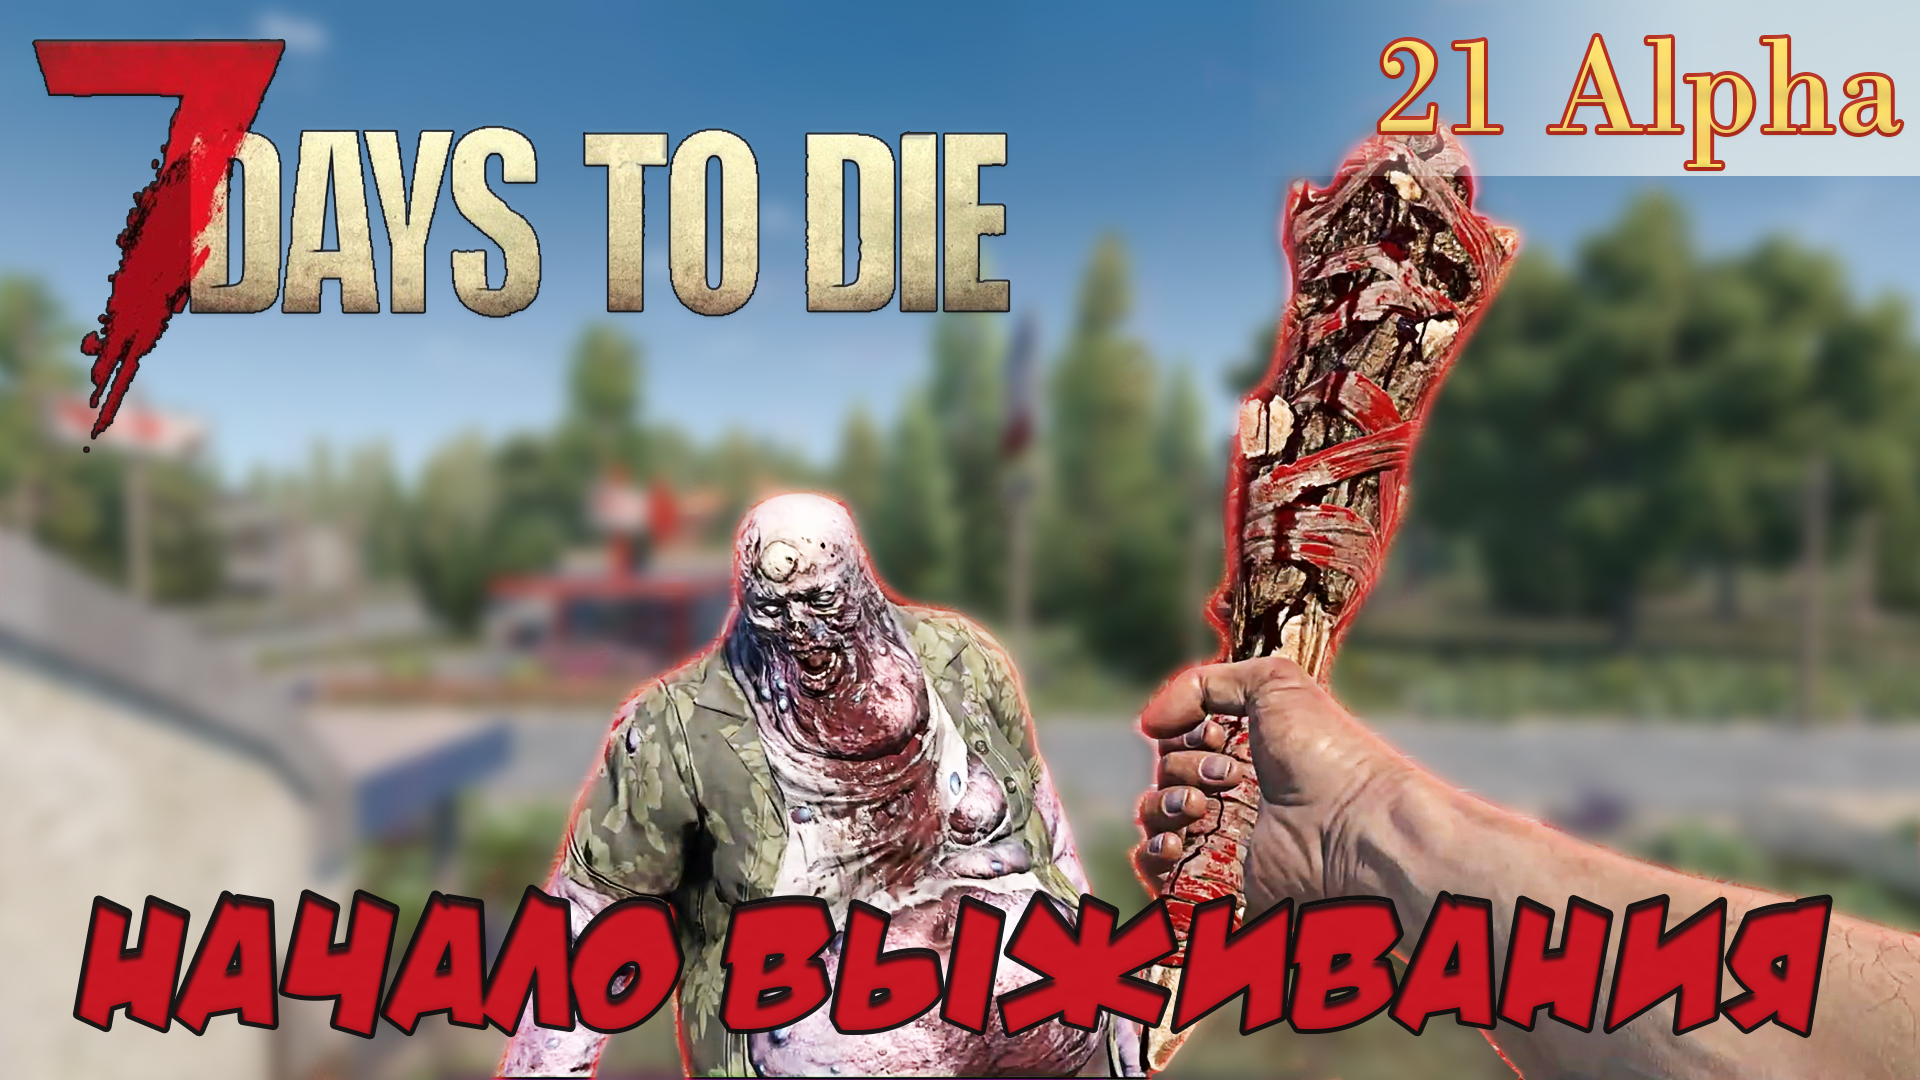 Could not fully initialize steam 7 days to die что делать фото 67